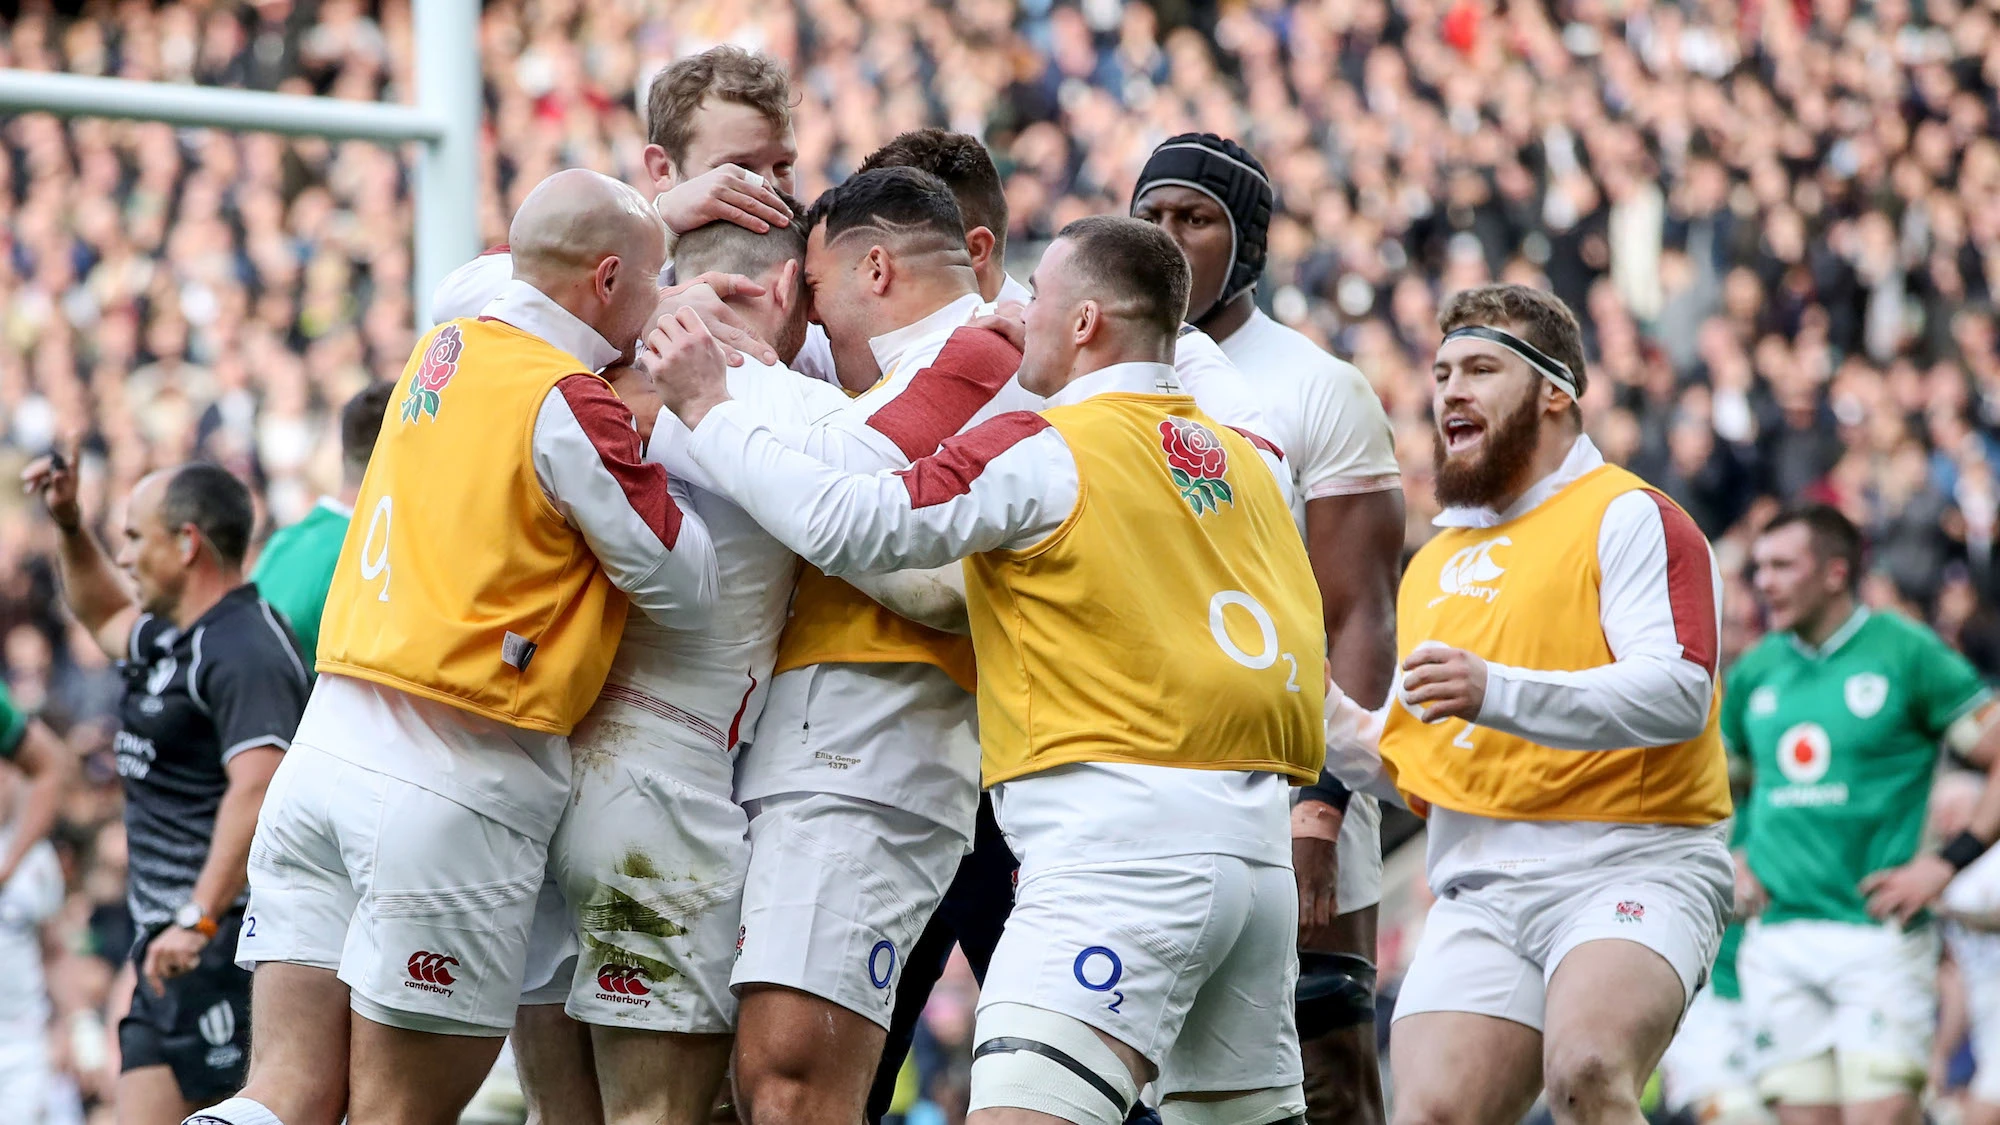 Elliot Daly celebrates scoring a try with teammates 23/2/2020